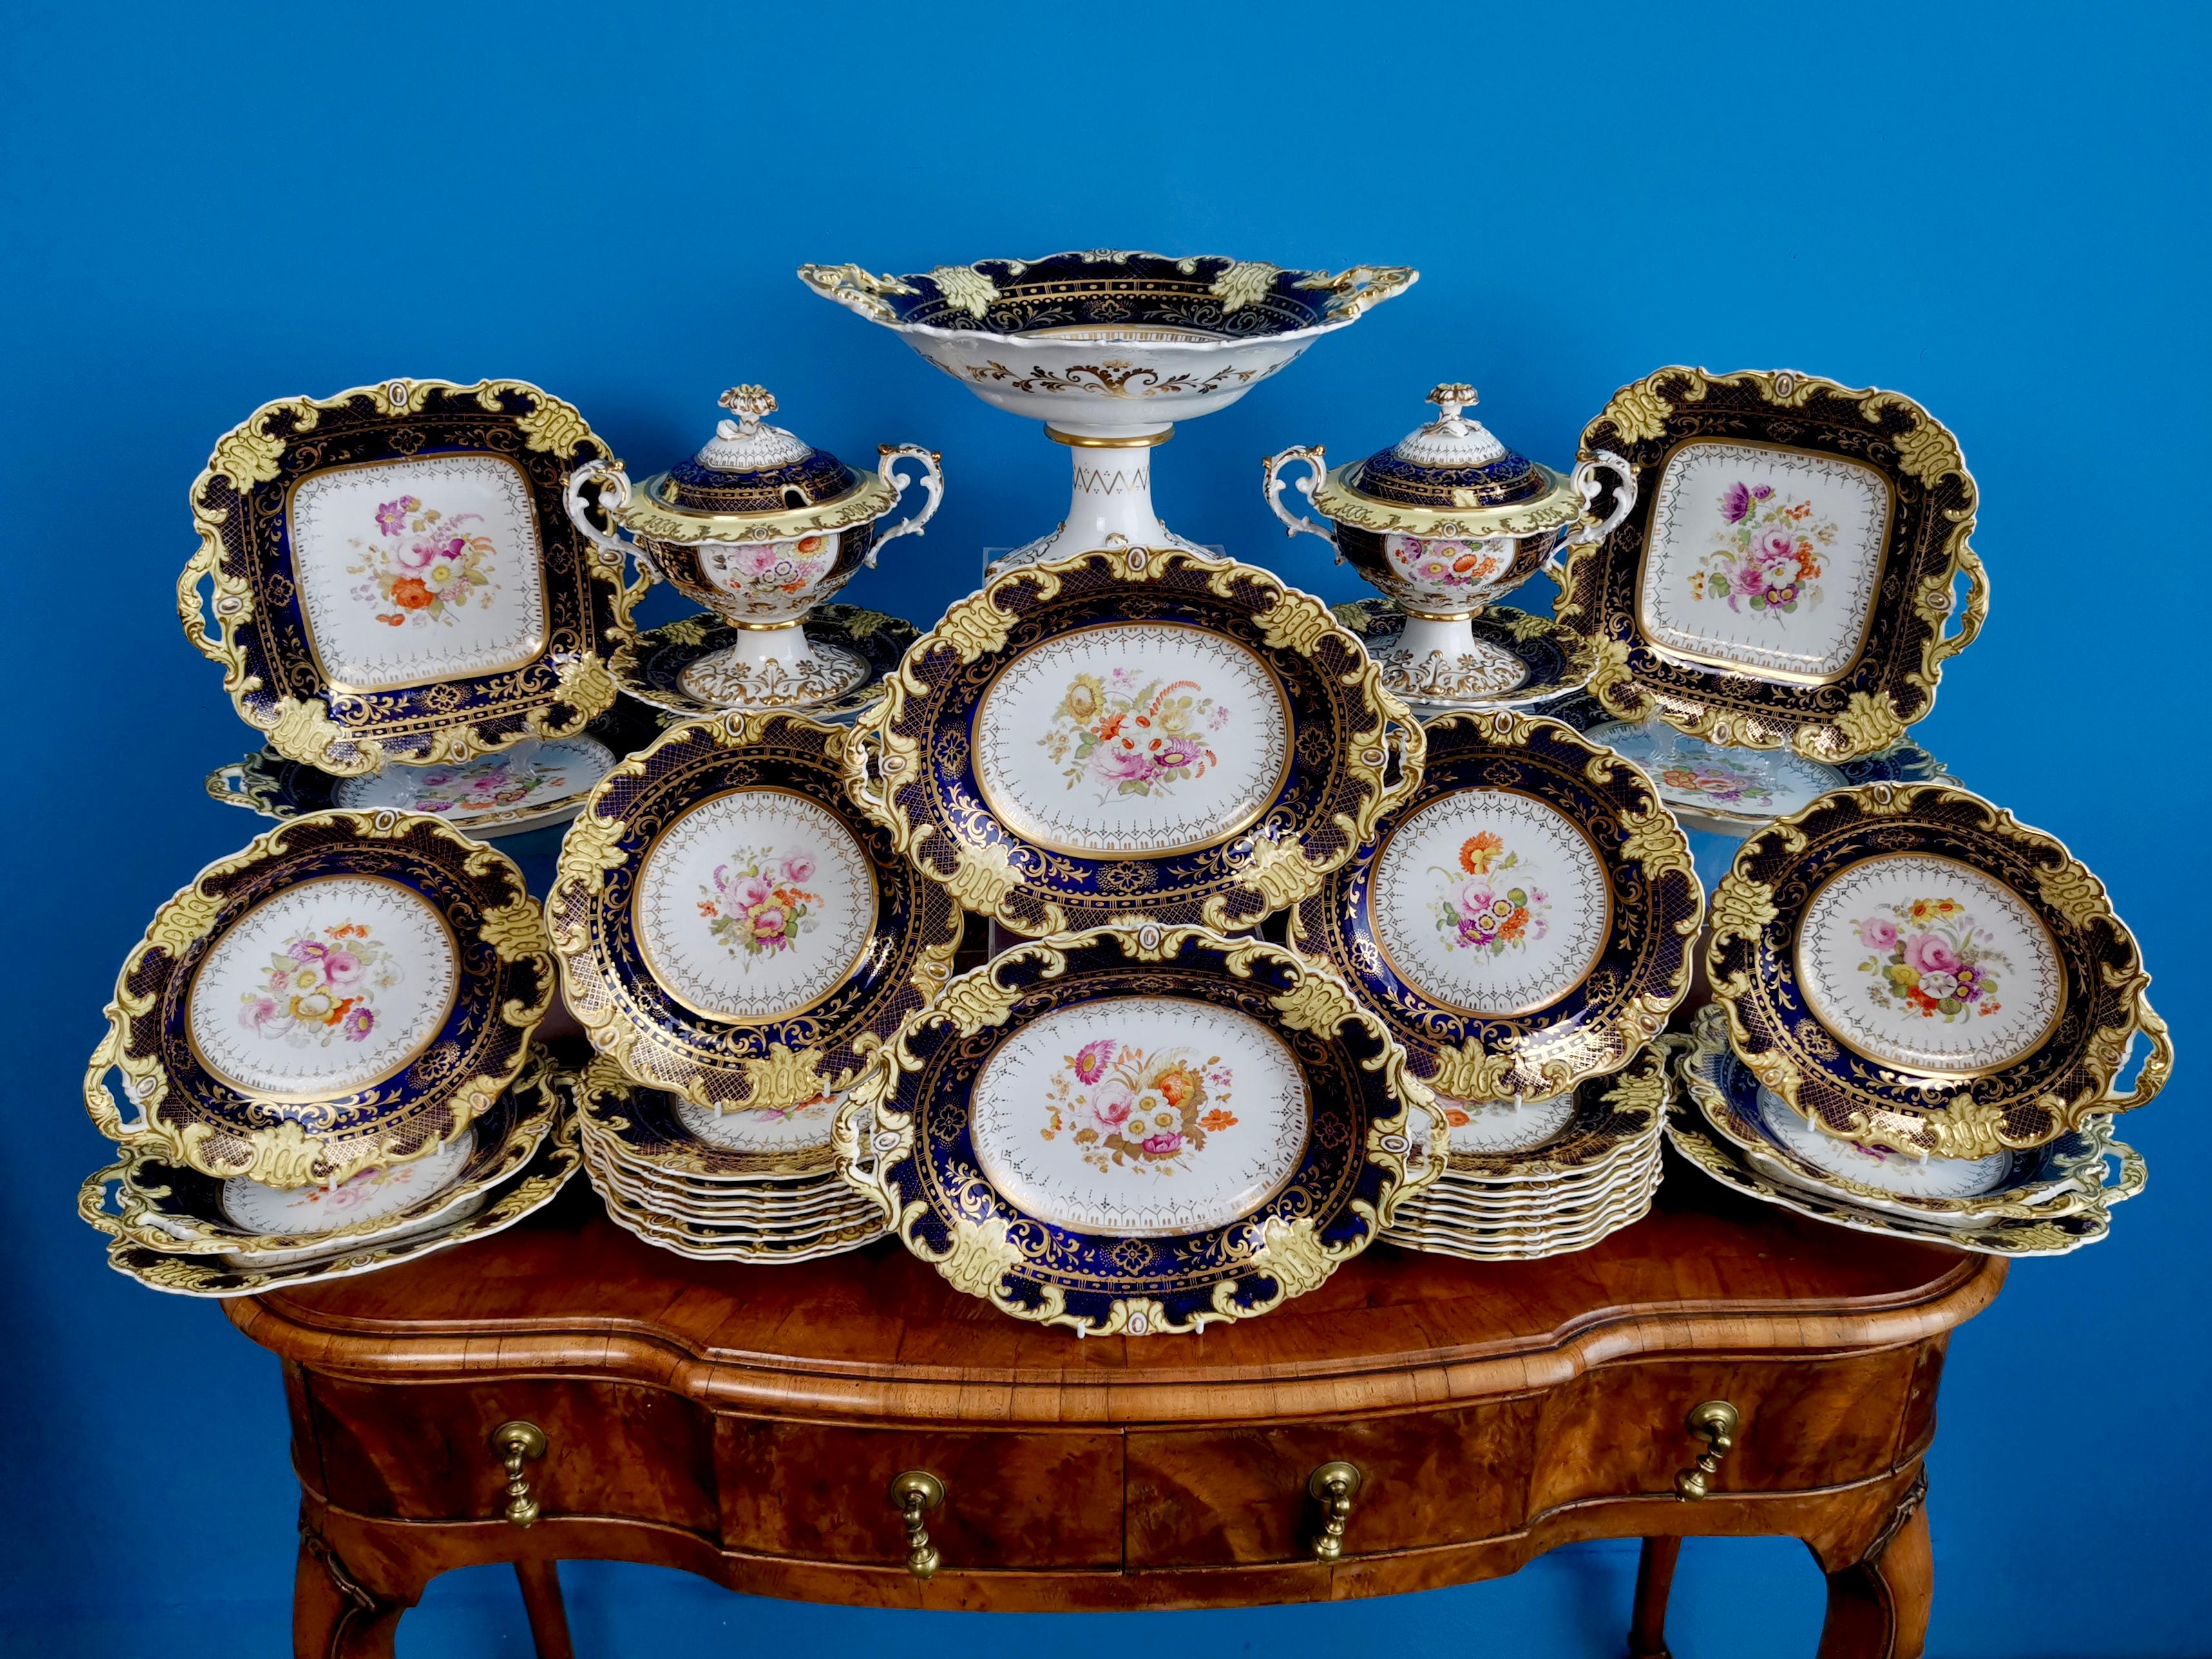 This is a stunning full 35-piece dessert service made by Ridgway circa 1825, which is known as the Regency period. The service consists of eighteen plates, four oval dishes, four square dishes, four one-handled dishes, two lidded sauce comports on